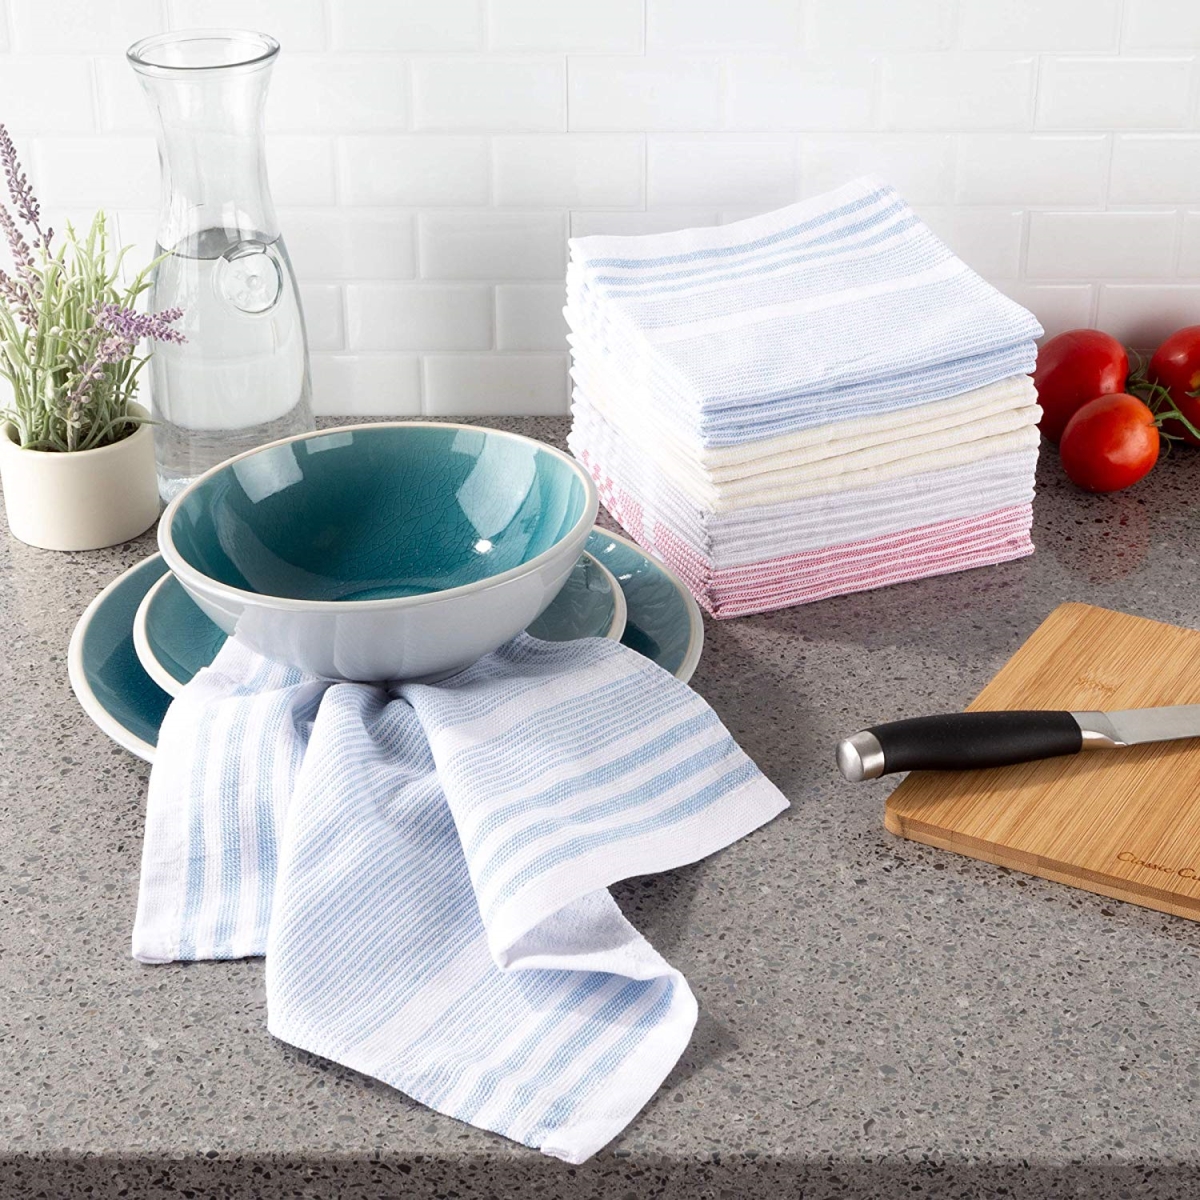 69a-39321 12.5 X 12.5 In. Home Kitchen Dish Cloth, Multi-color - Set Of 16